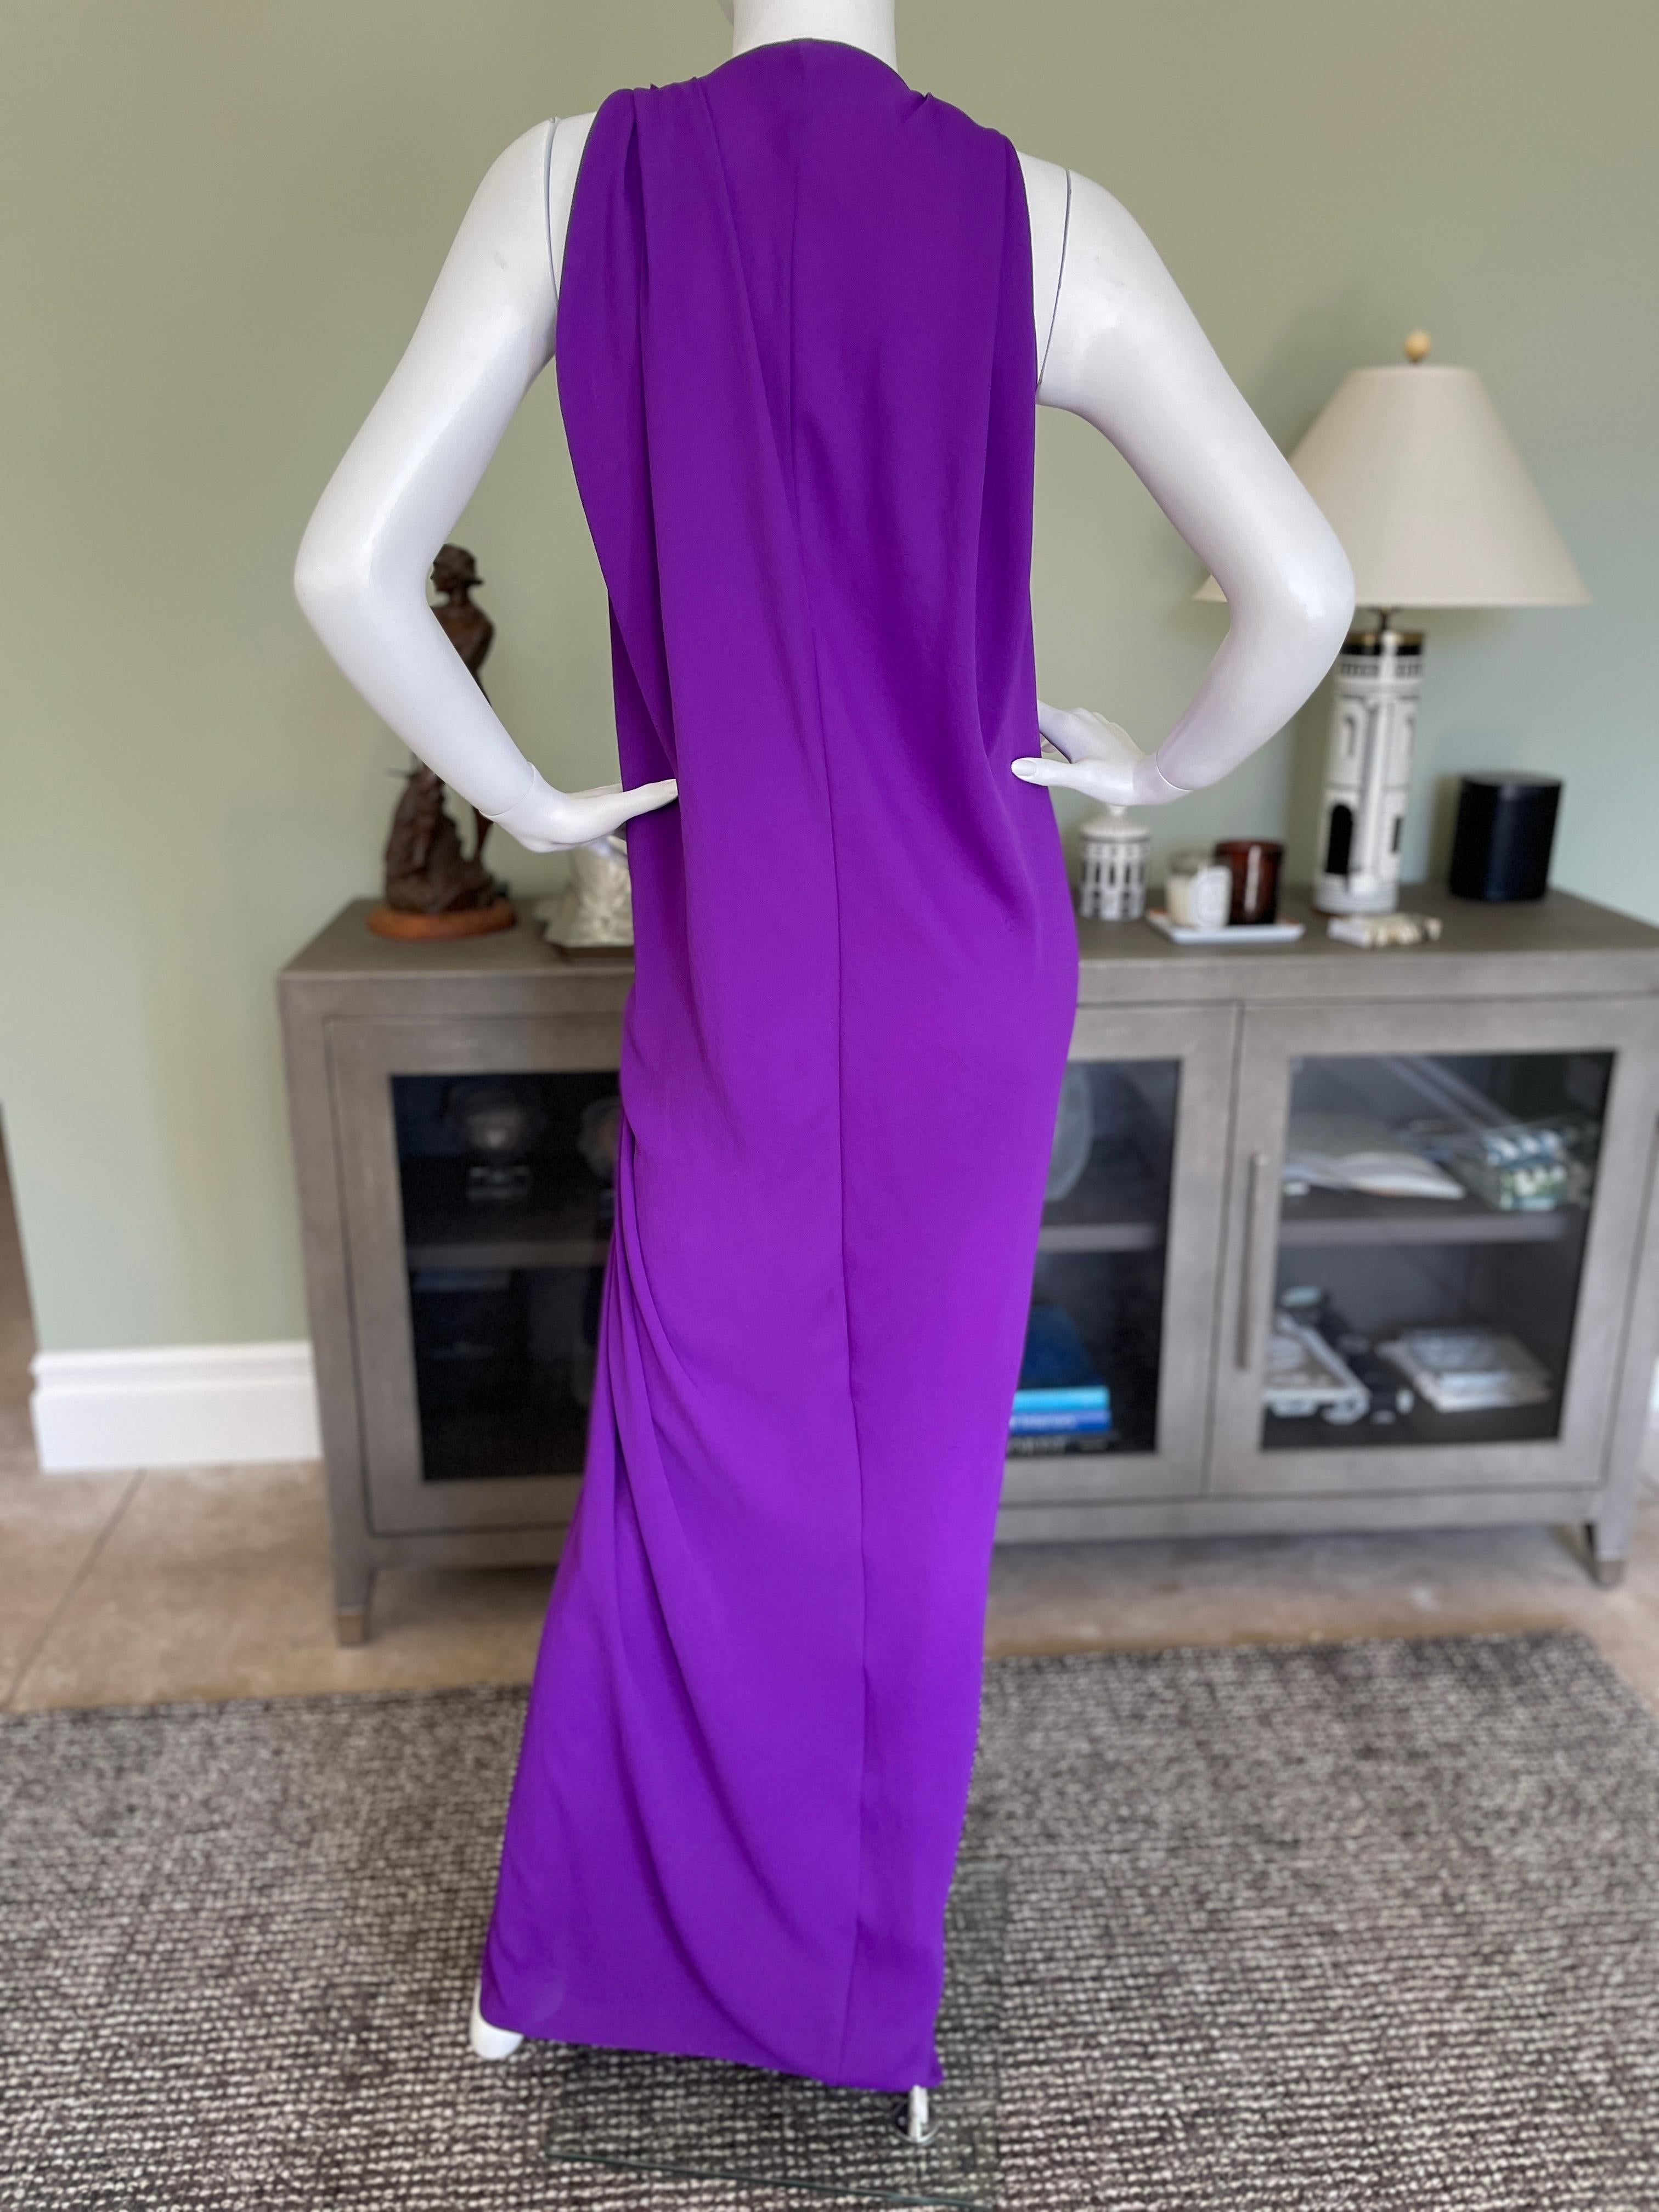  Lanvin by Alber Elbaz 2014 Plunging Purple Evening Dress with High Slit For Sale 1